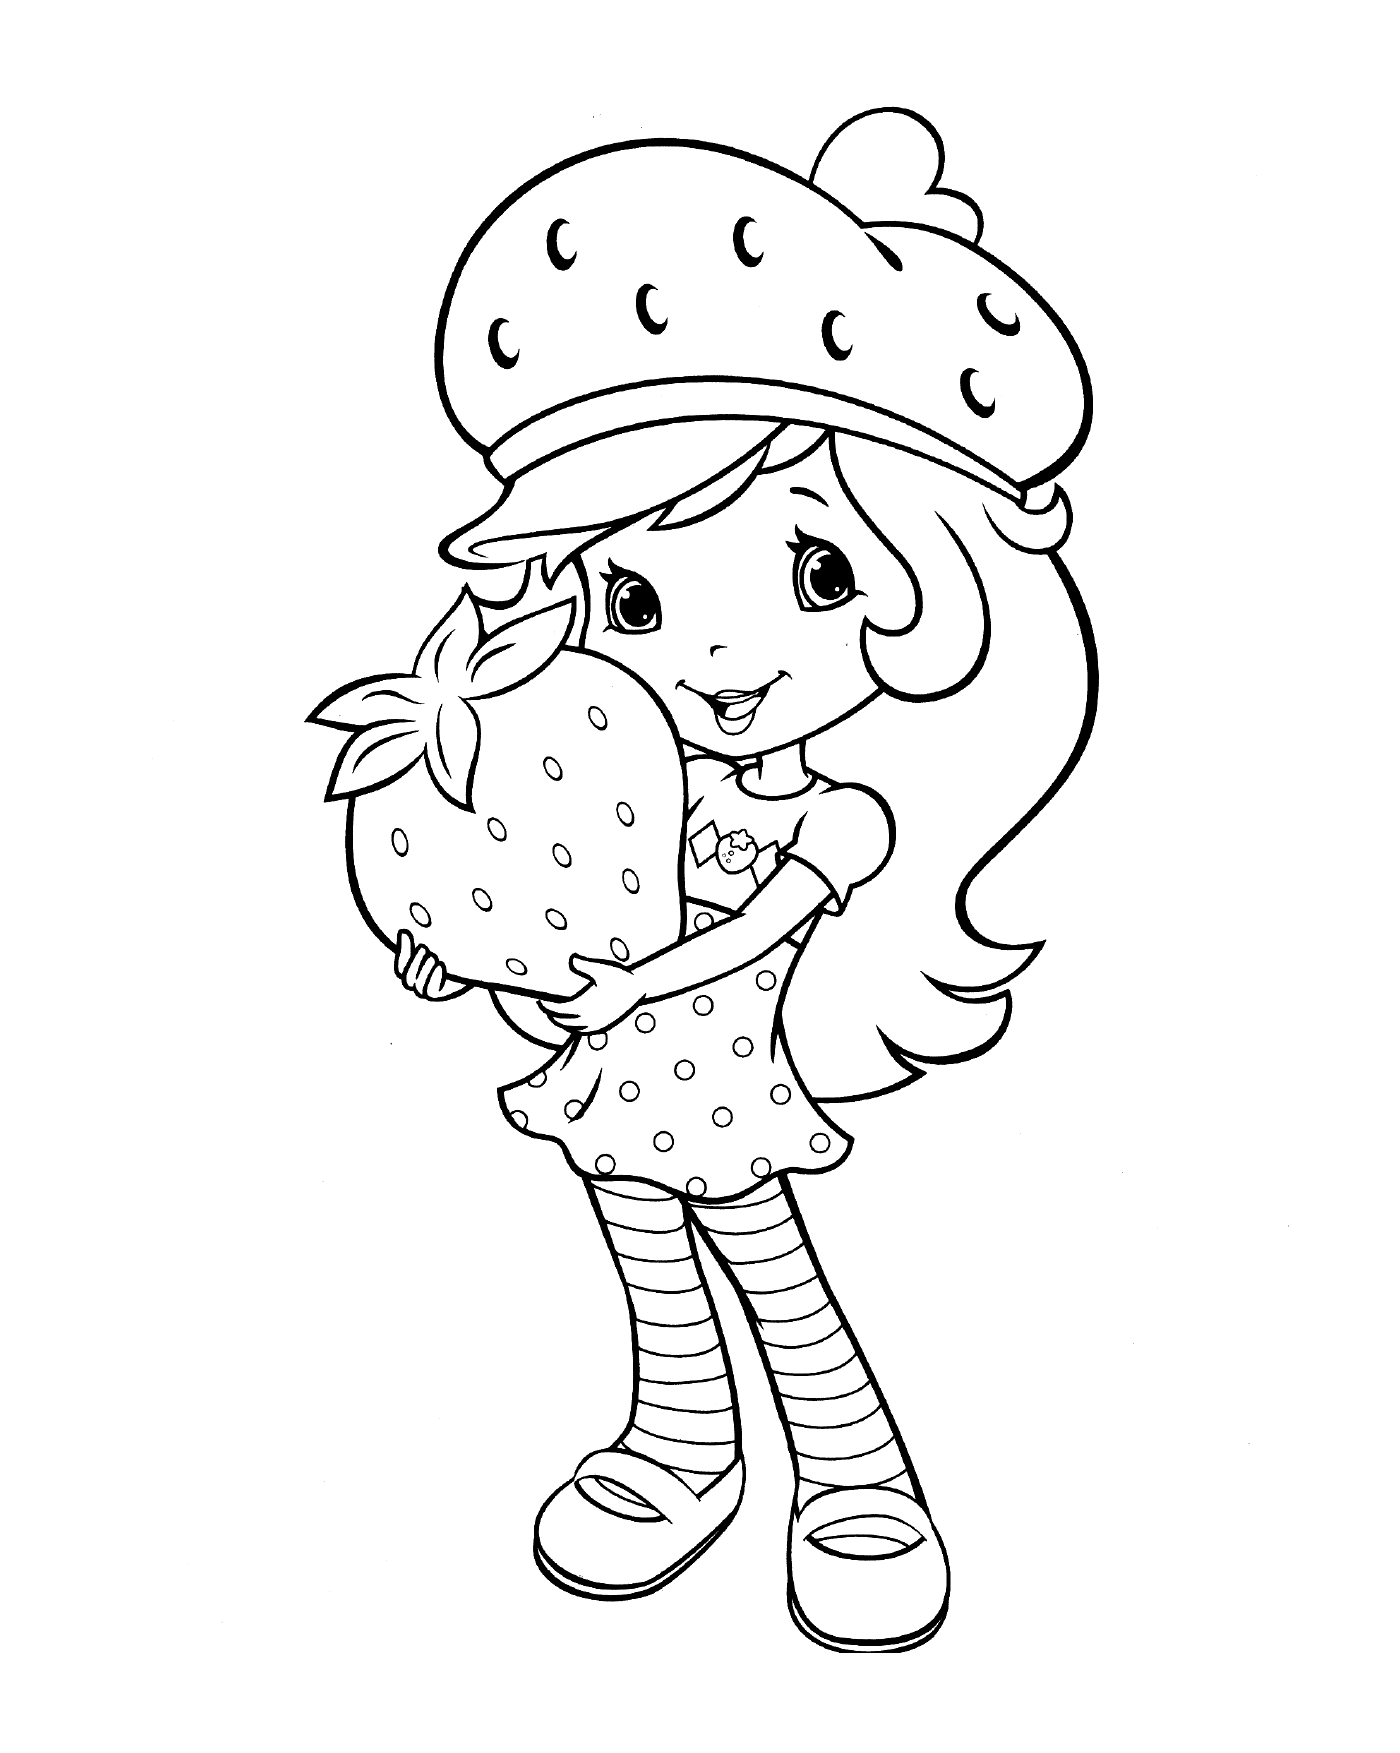  A girl holding a strawberry 